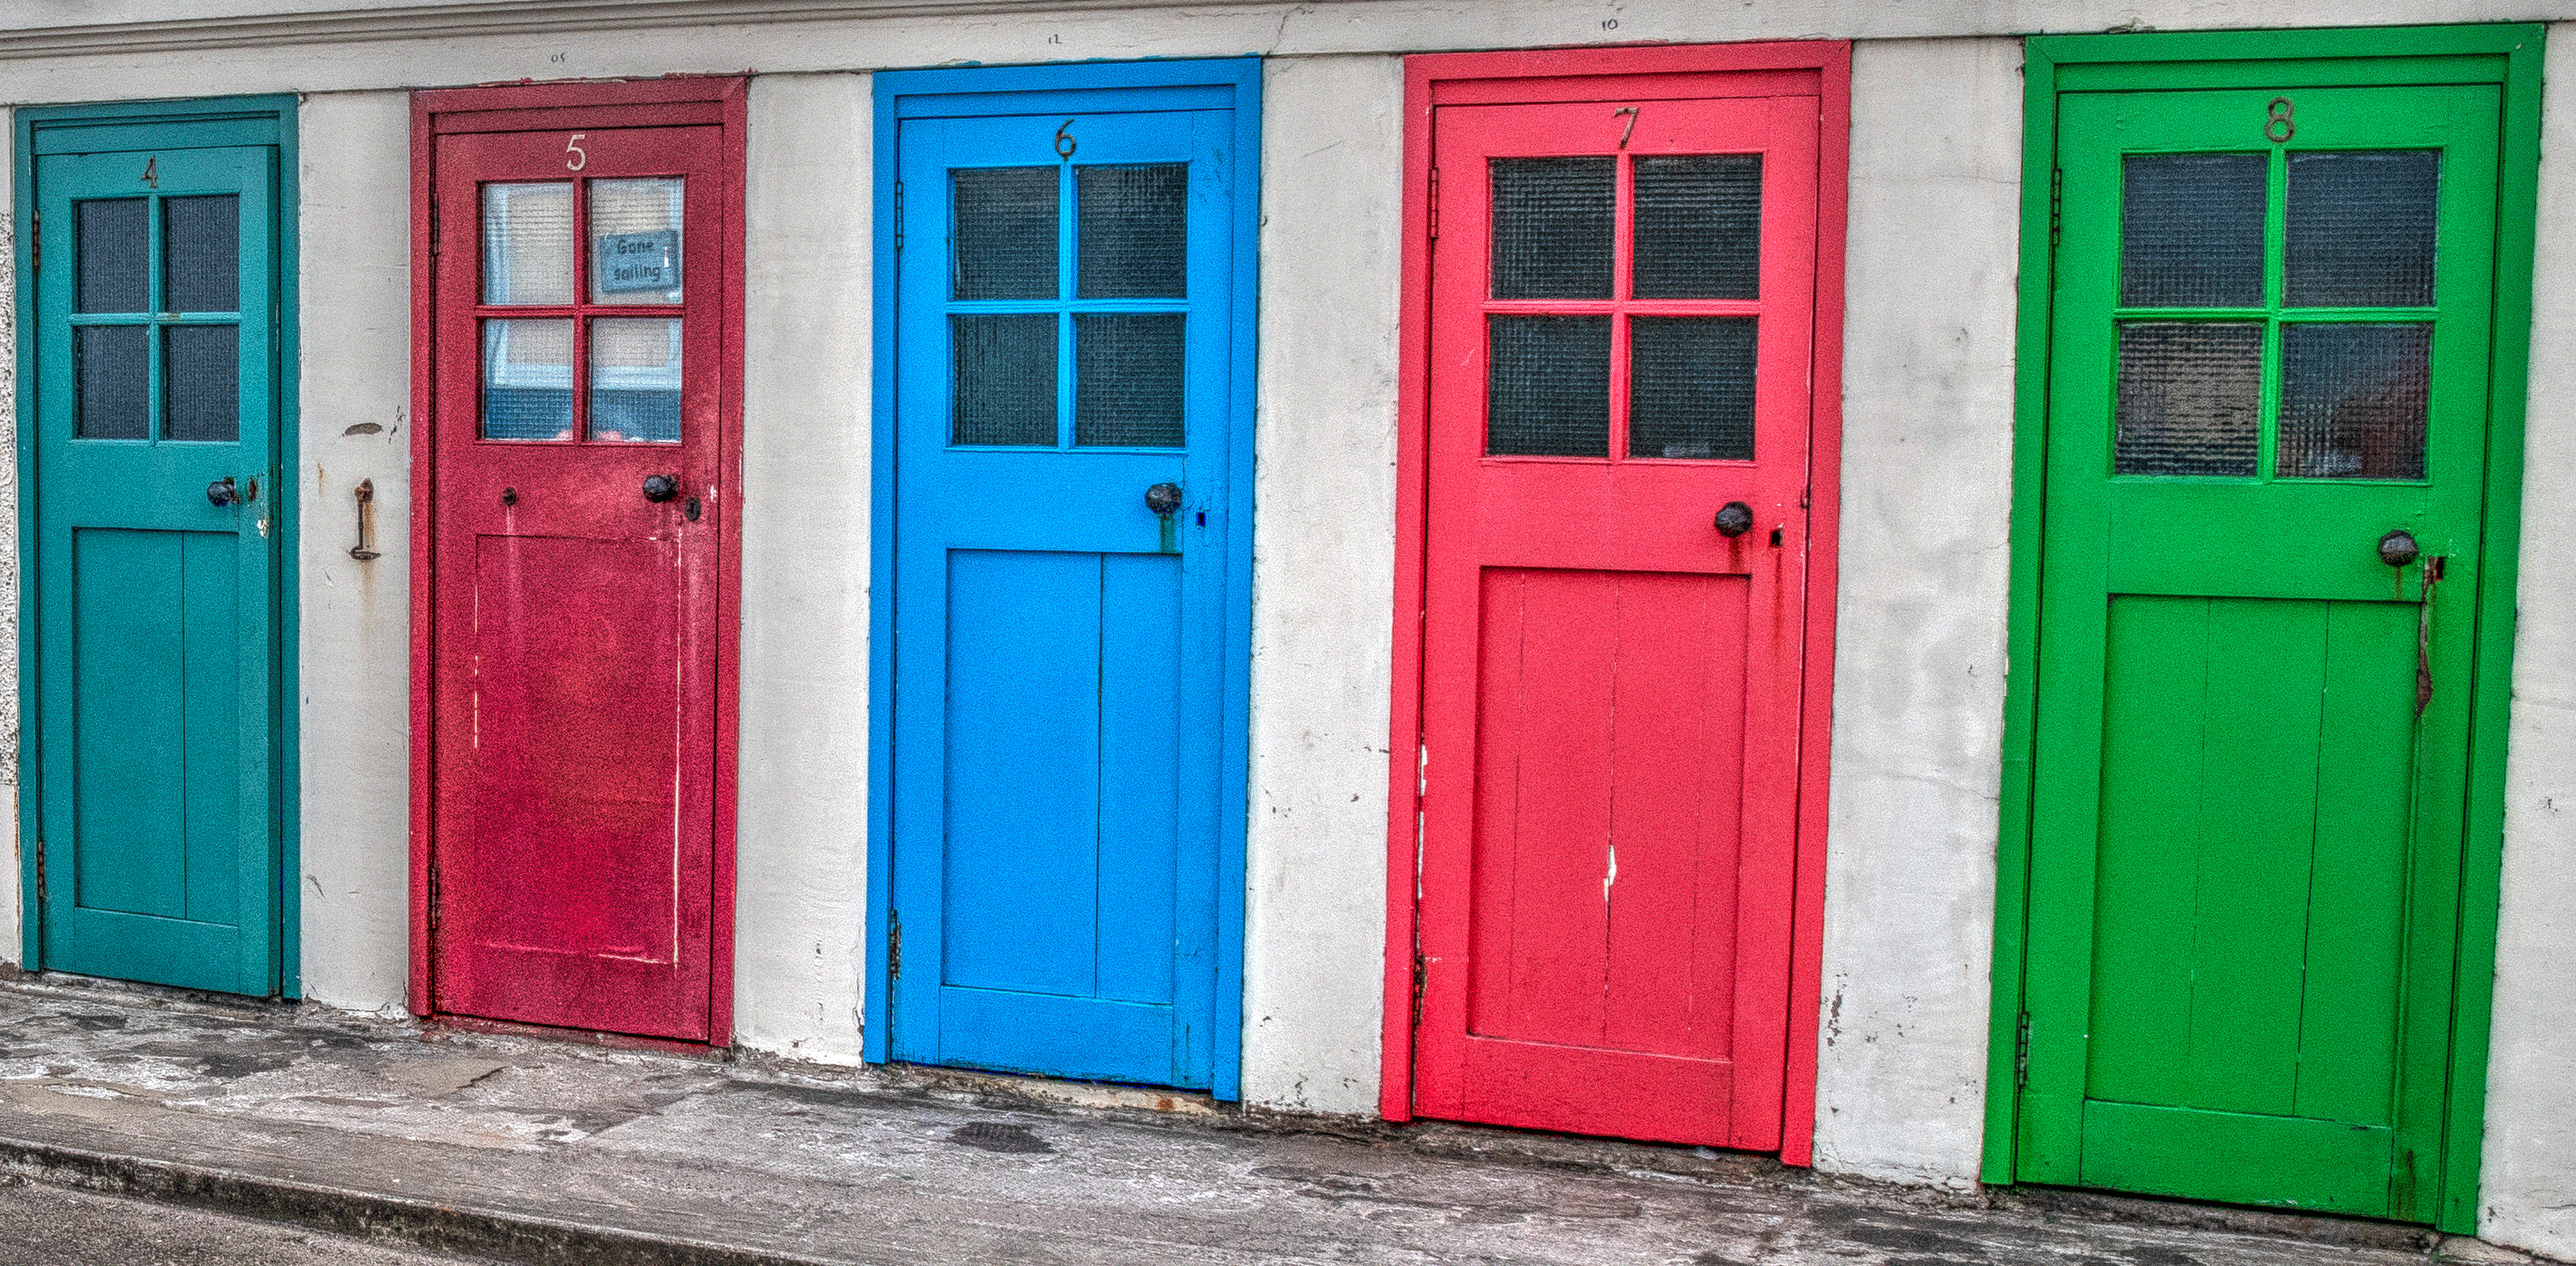 An array of colored doors at Berwick Harbour.